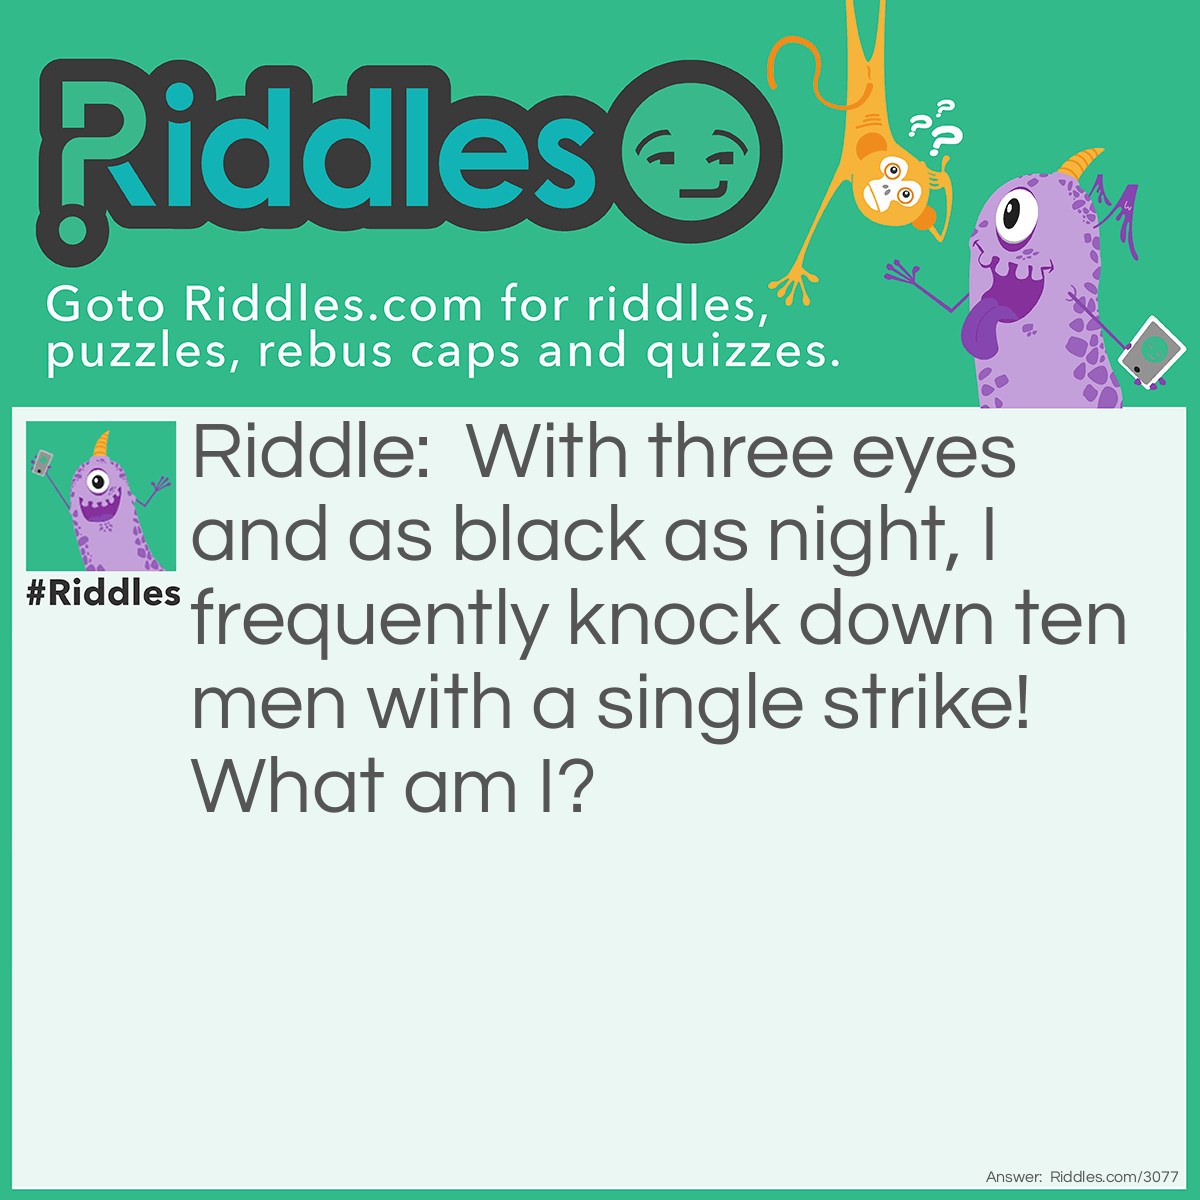 Riddle: With three eyes and a black as night, I frequently knock down ten men with a single strike! What am I? Answer: A Bowling ball.